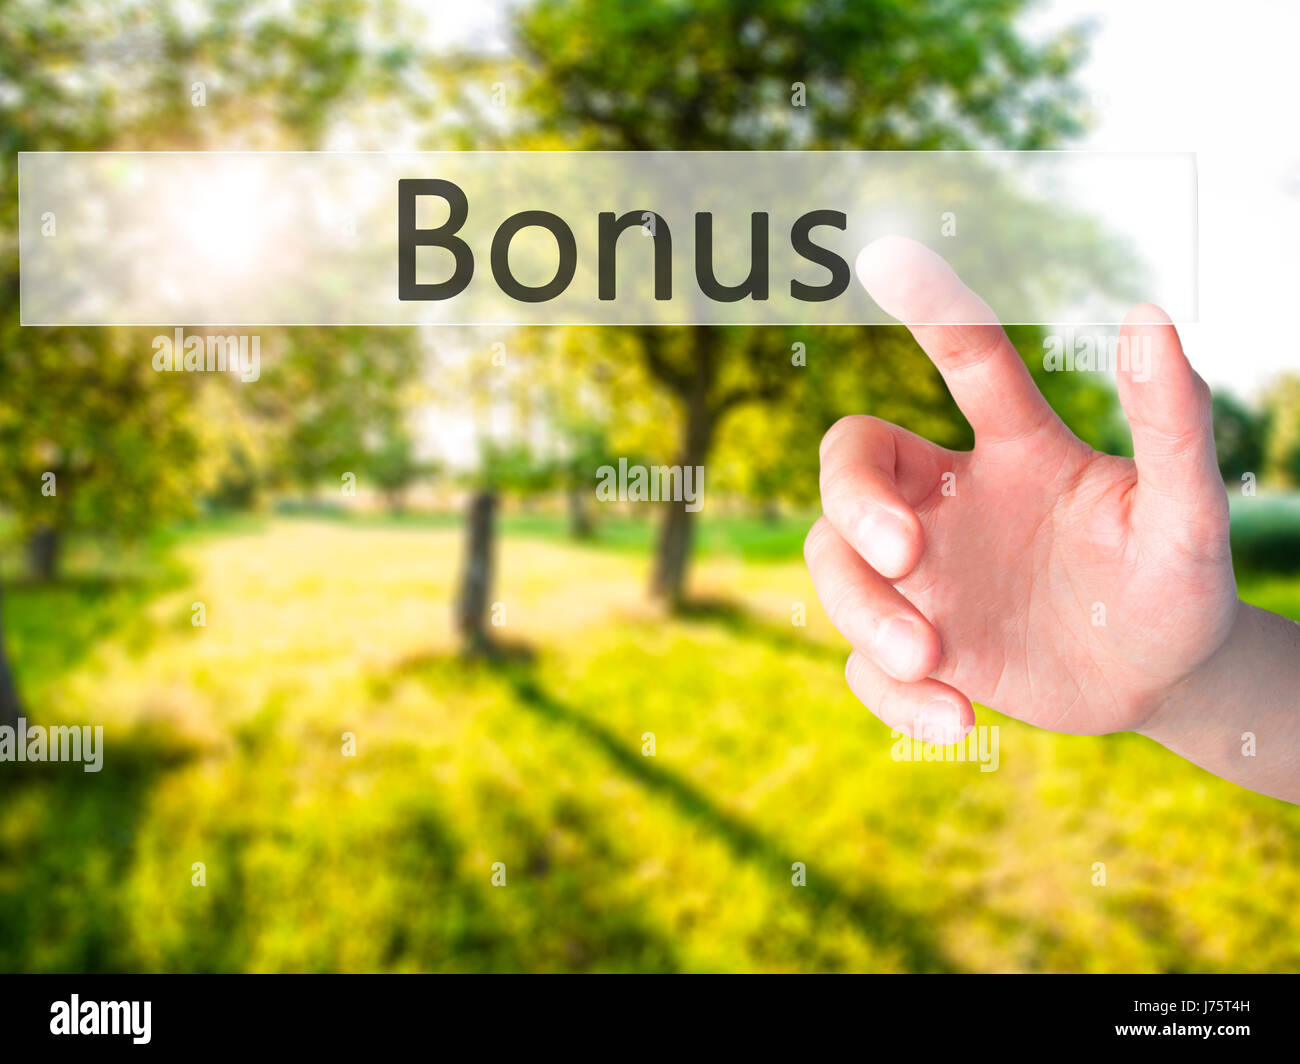 Bonus - Hand pressing a button on blurred background concept . Business, technology, internet concept. Stock Photo Stock Photo